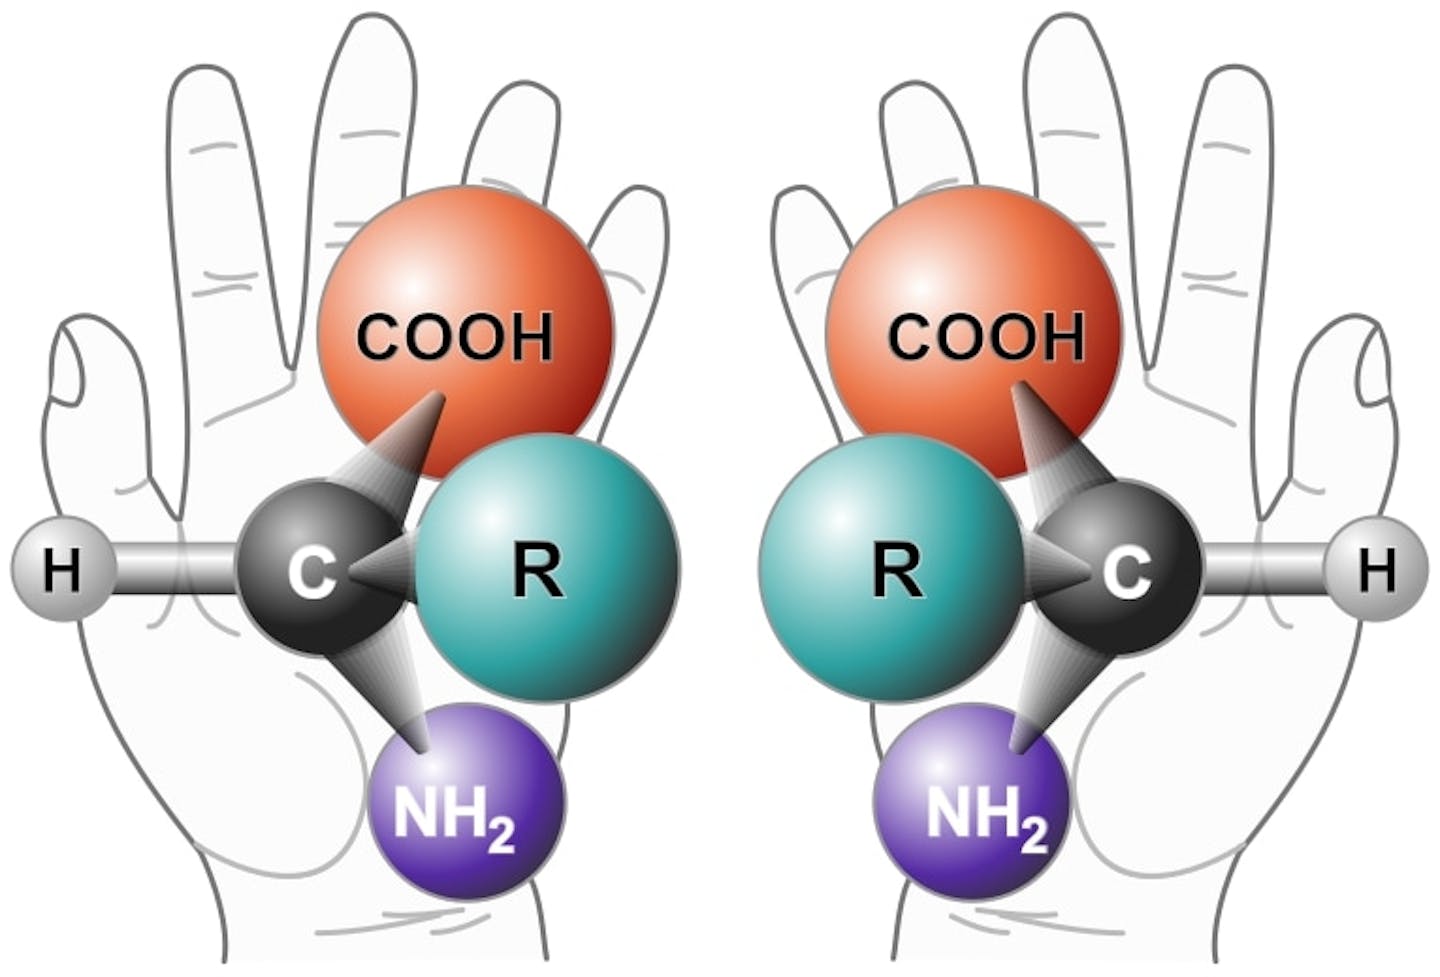 Two molecules overlaid onto a right and left hand.